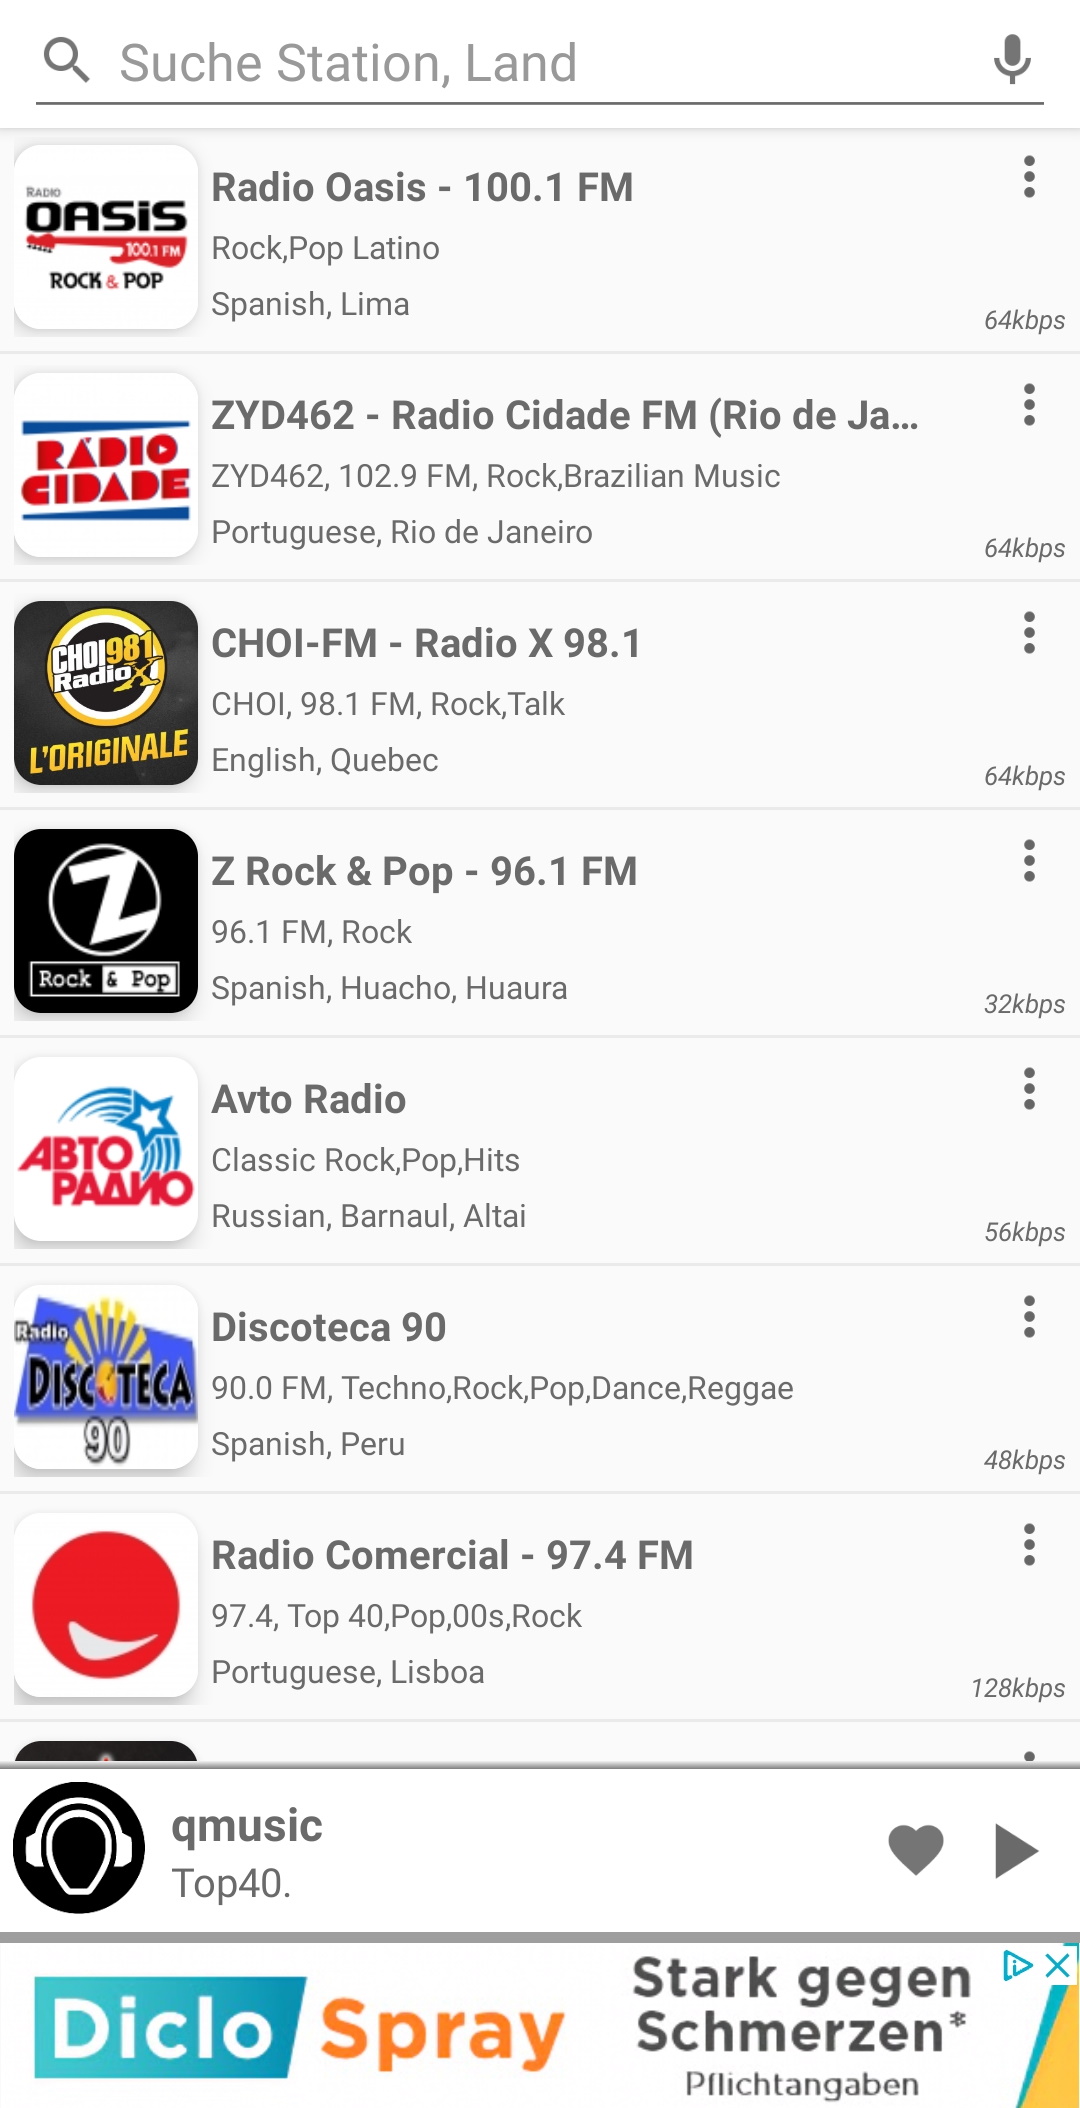 How to Use FM Radio on Your iPhone or Android